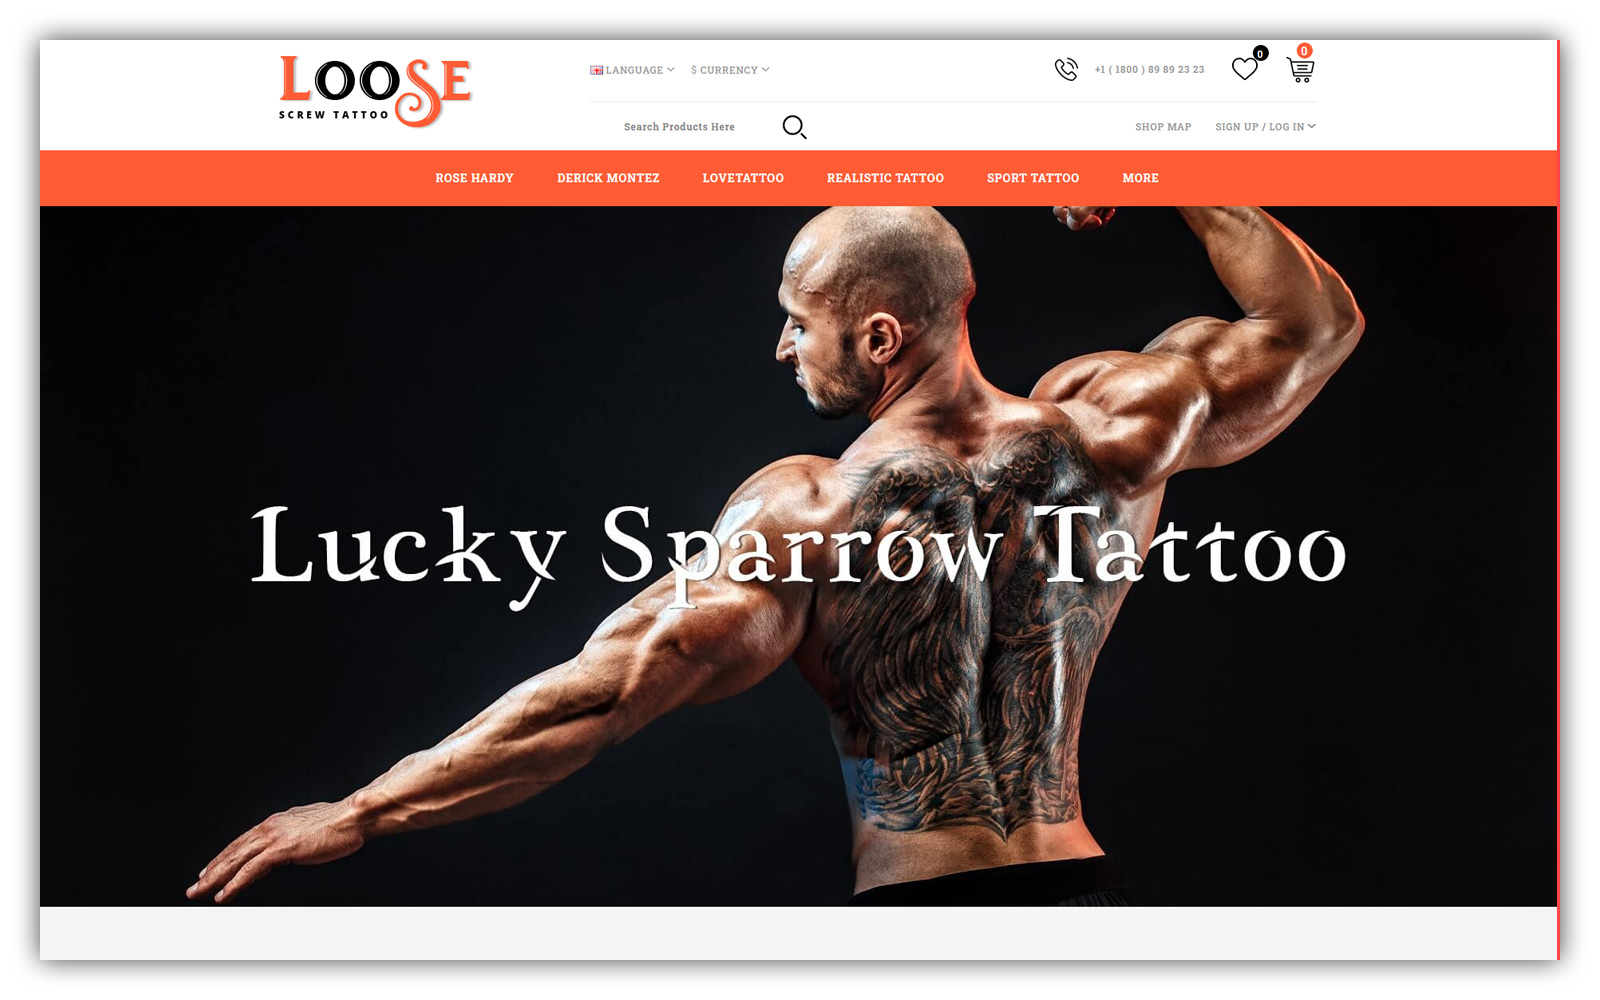 Loose - Tattoo Store OpenCart Template